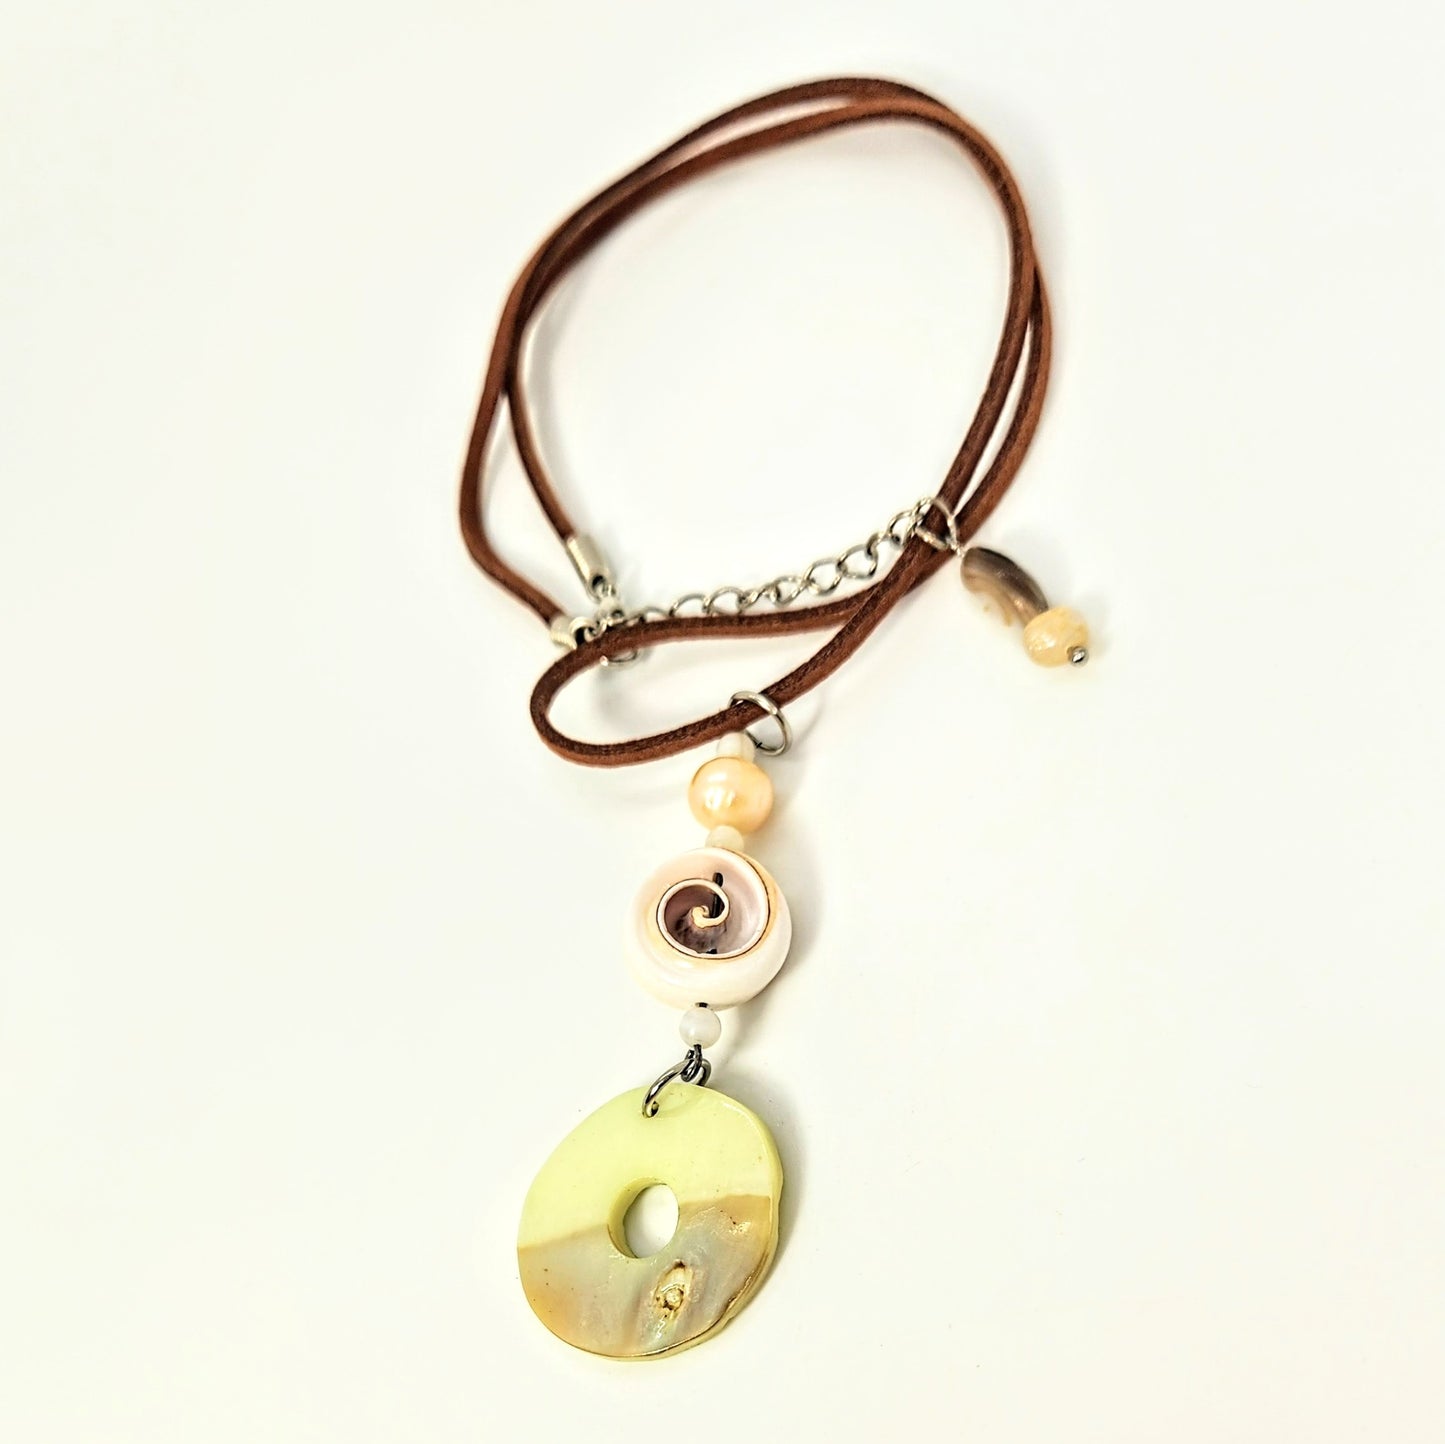 Shells Pendant + Leather Cord Necklace